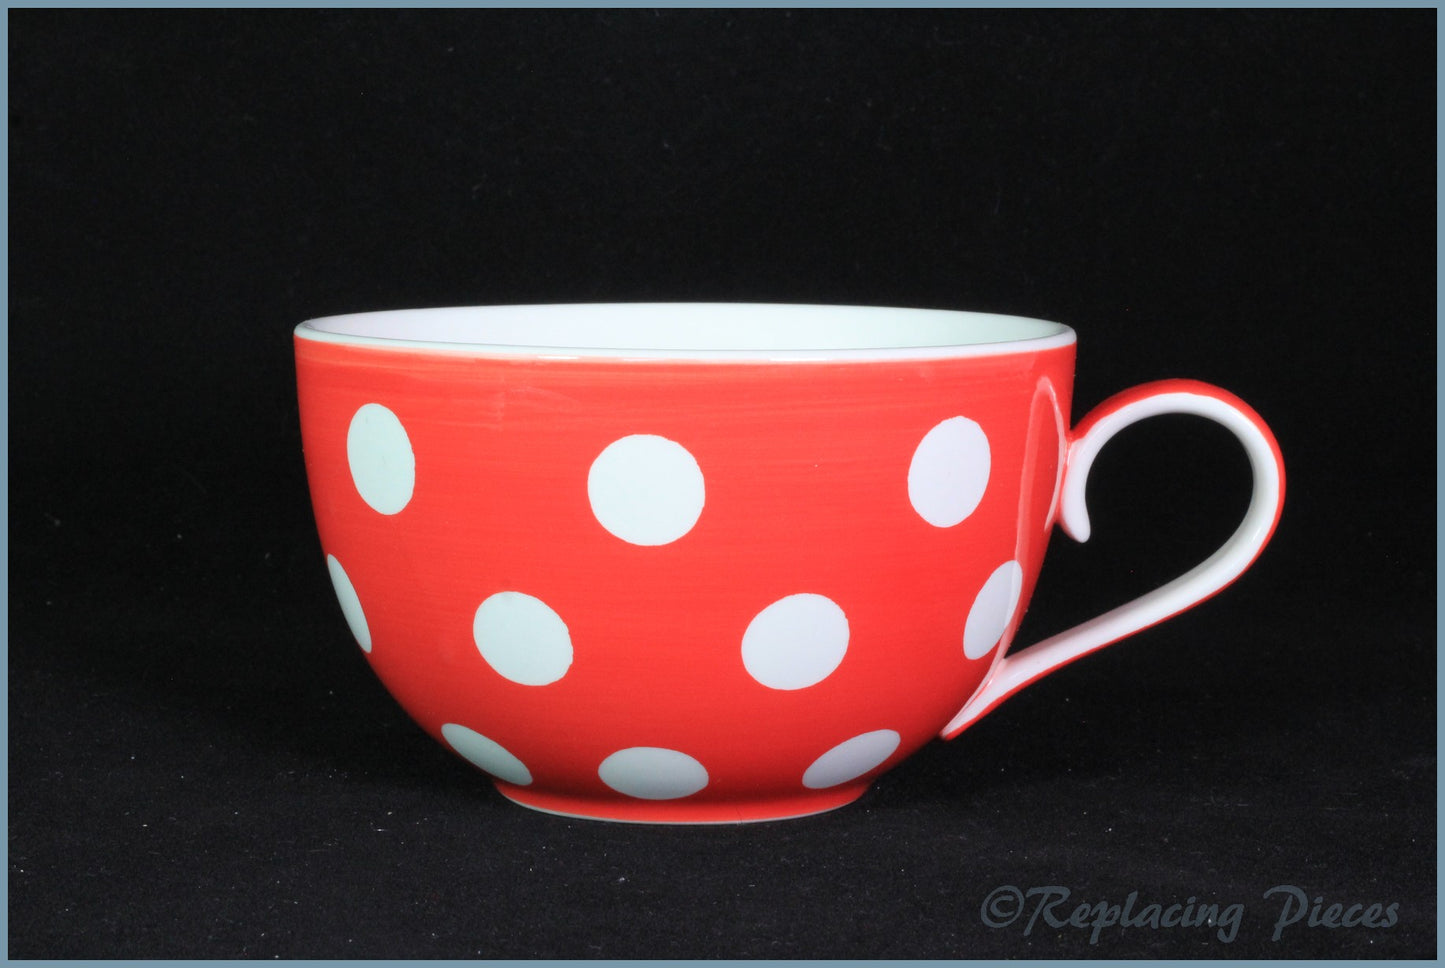 RPW59 - Whittards - Breakfast Cup (Red Spotty)